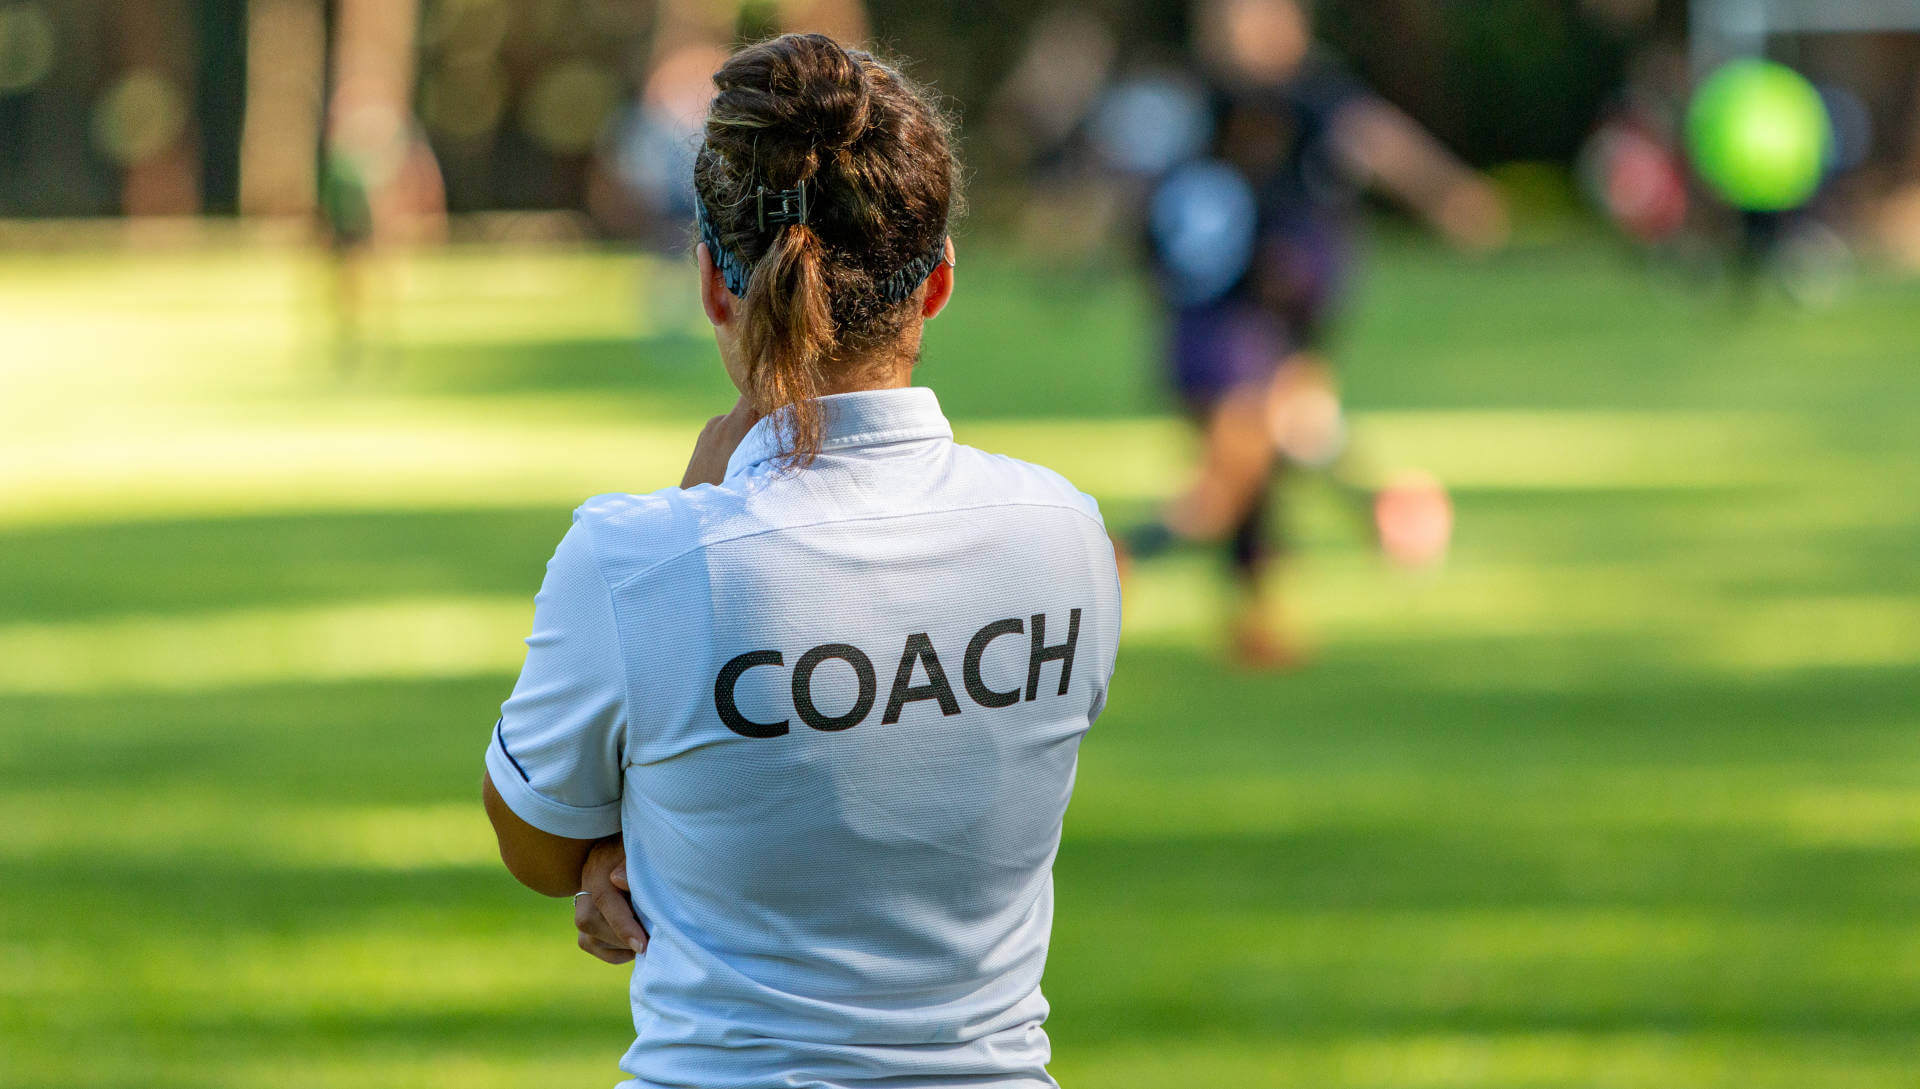 Featured image for “Coaching the Coach Part 2”